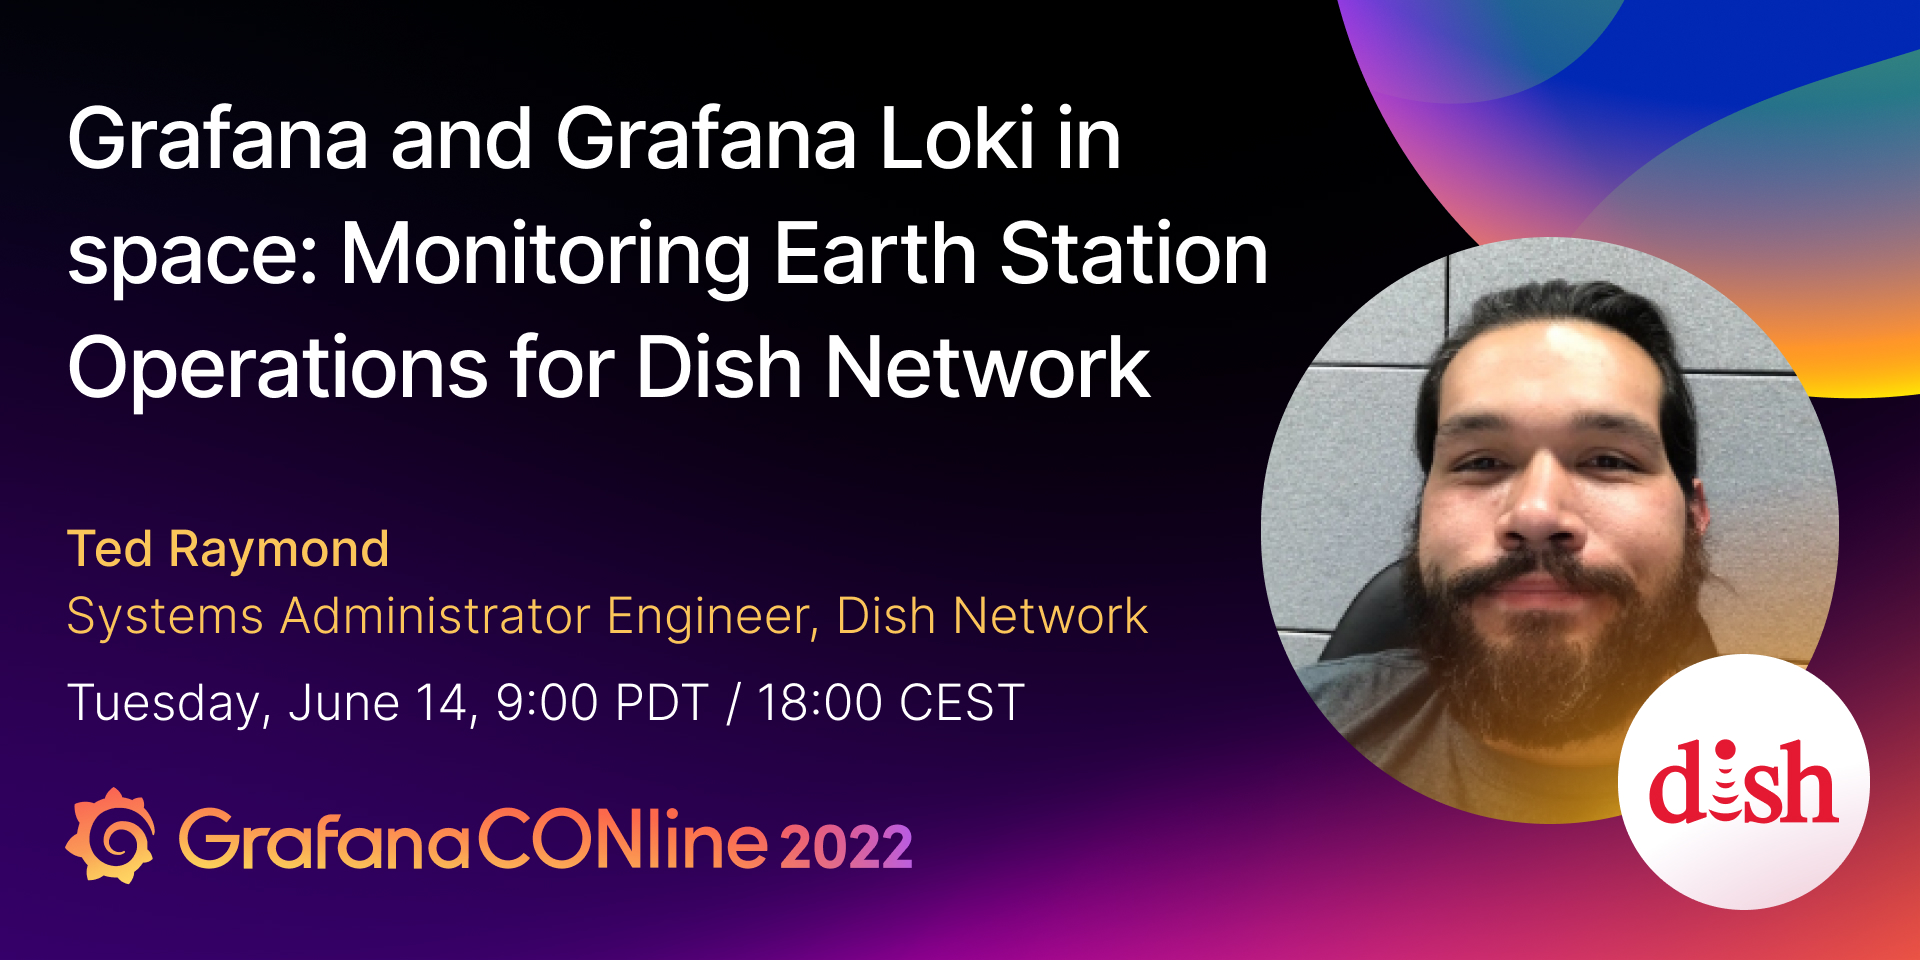 Grafana and Grafana Loki in space: Monitoring Earth Station Operations for Dish Network